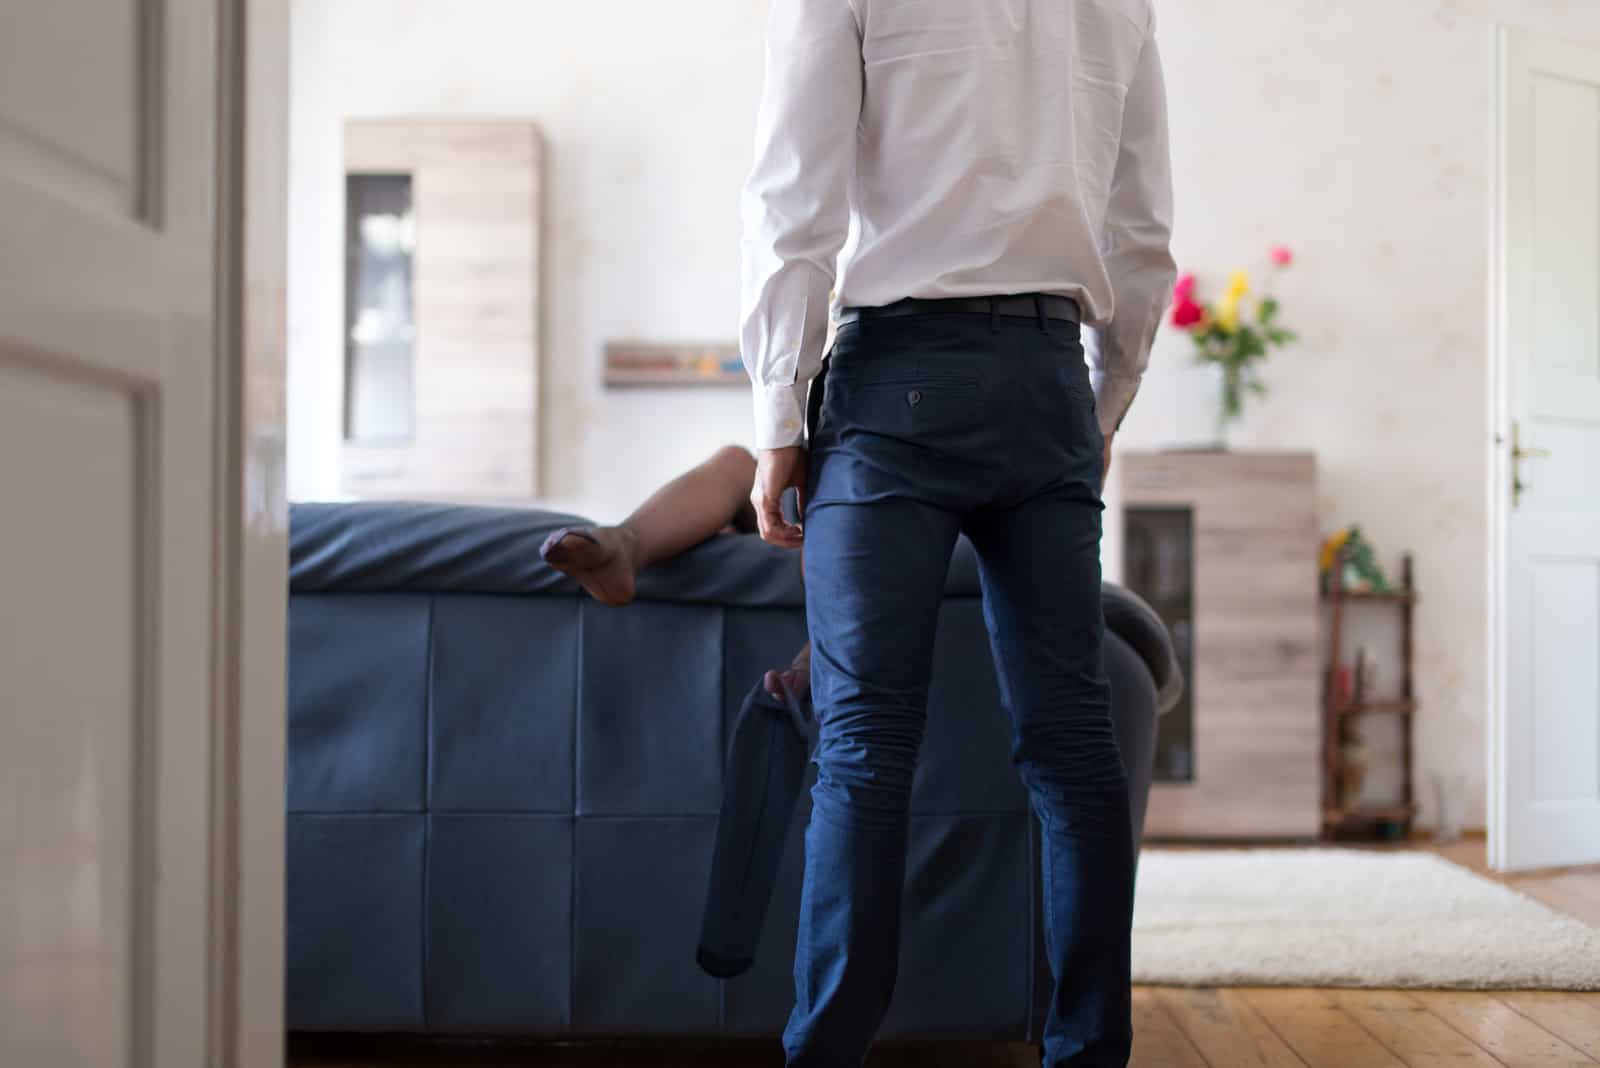 man in suit standing in front of sofa with woman on it